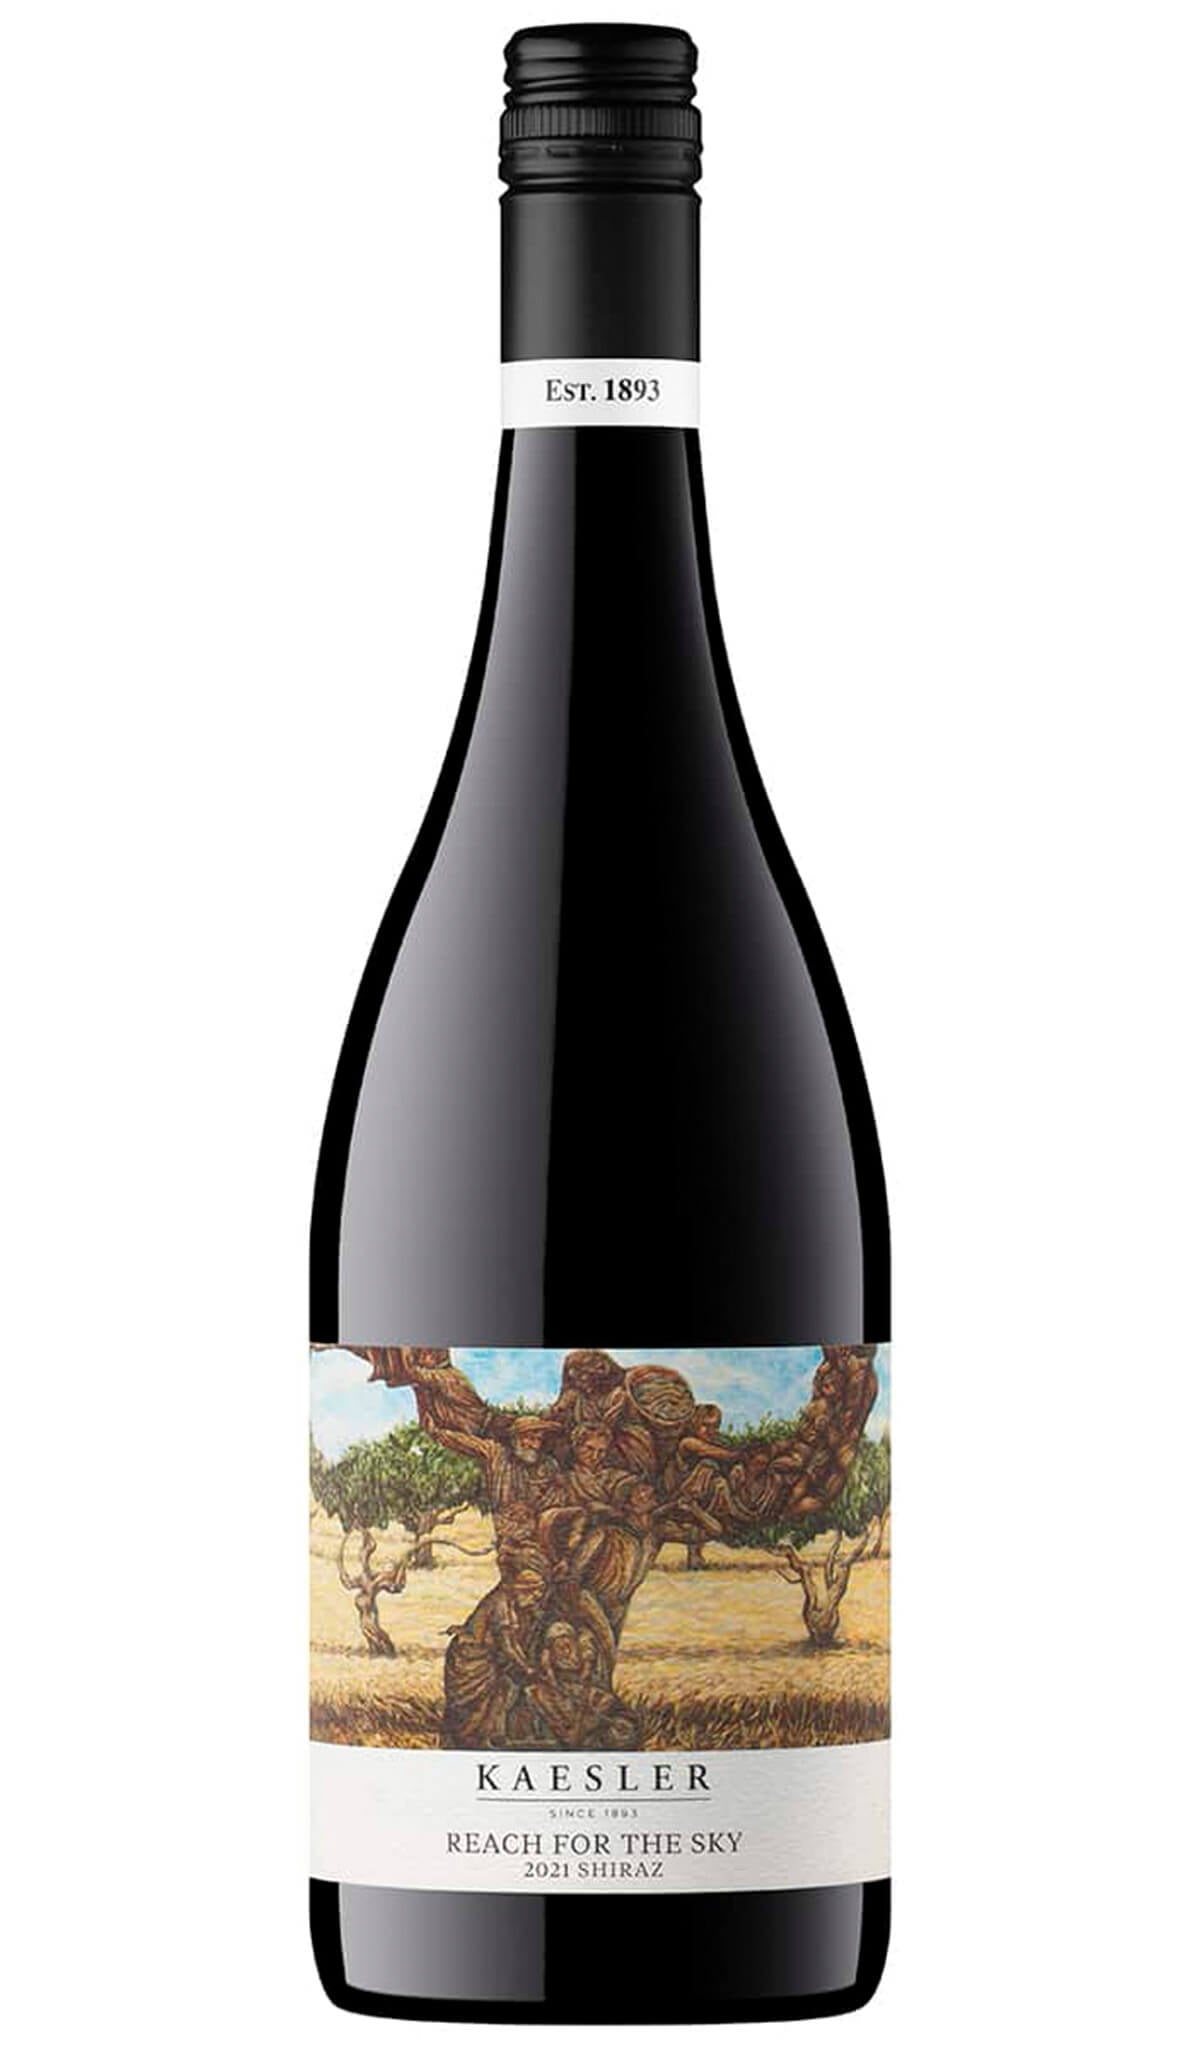 Find out more, explore the range and buy Kaesler Reach For The Sky Shiraz 2021 (Barossa Valley) available online at Wine Sellers Direct - Australia's independent liquor specialists.